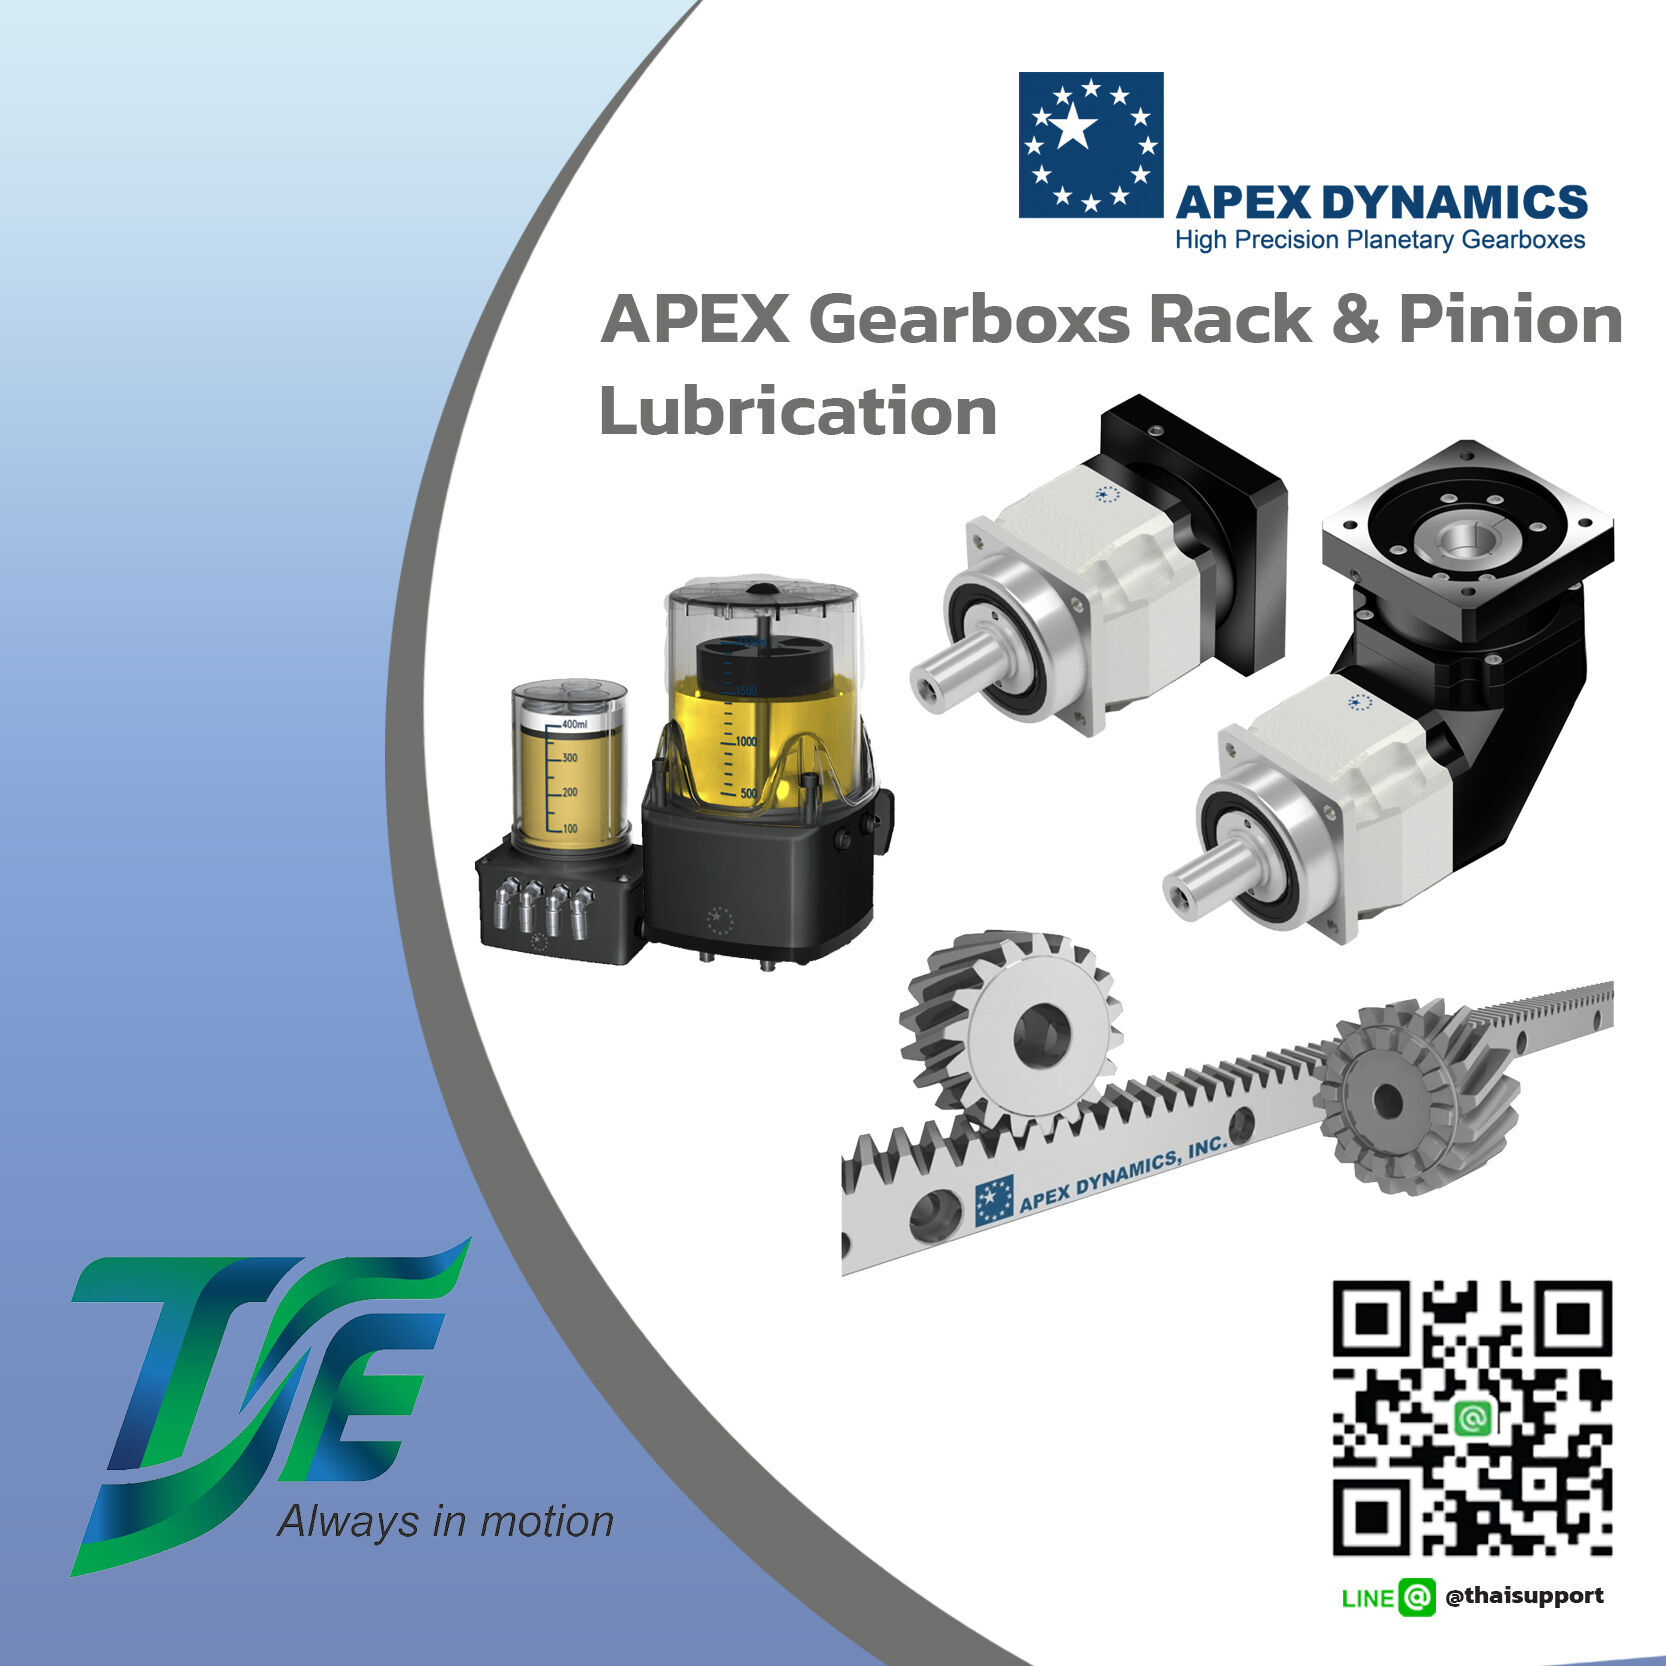 Gearbox Rack Pinion and Lubrication 